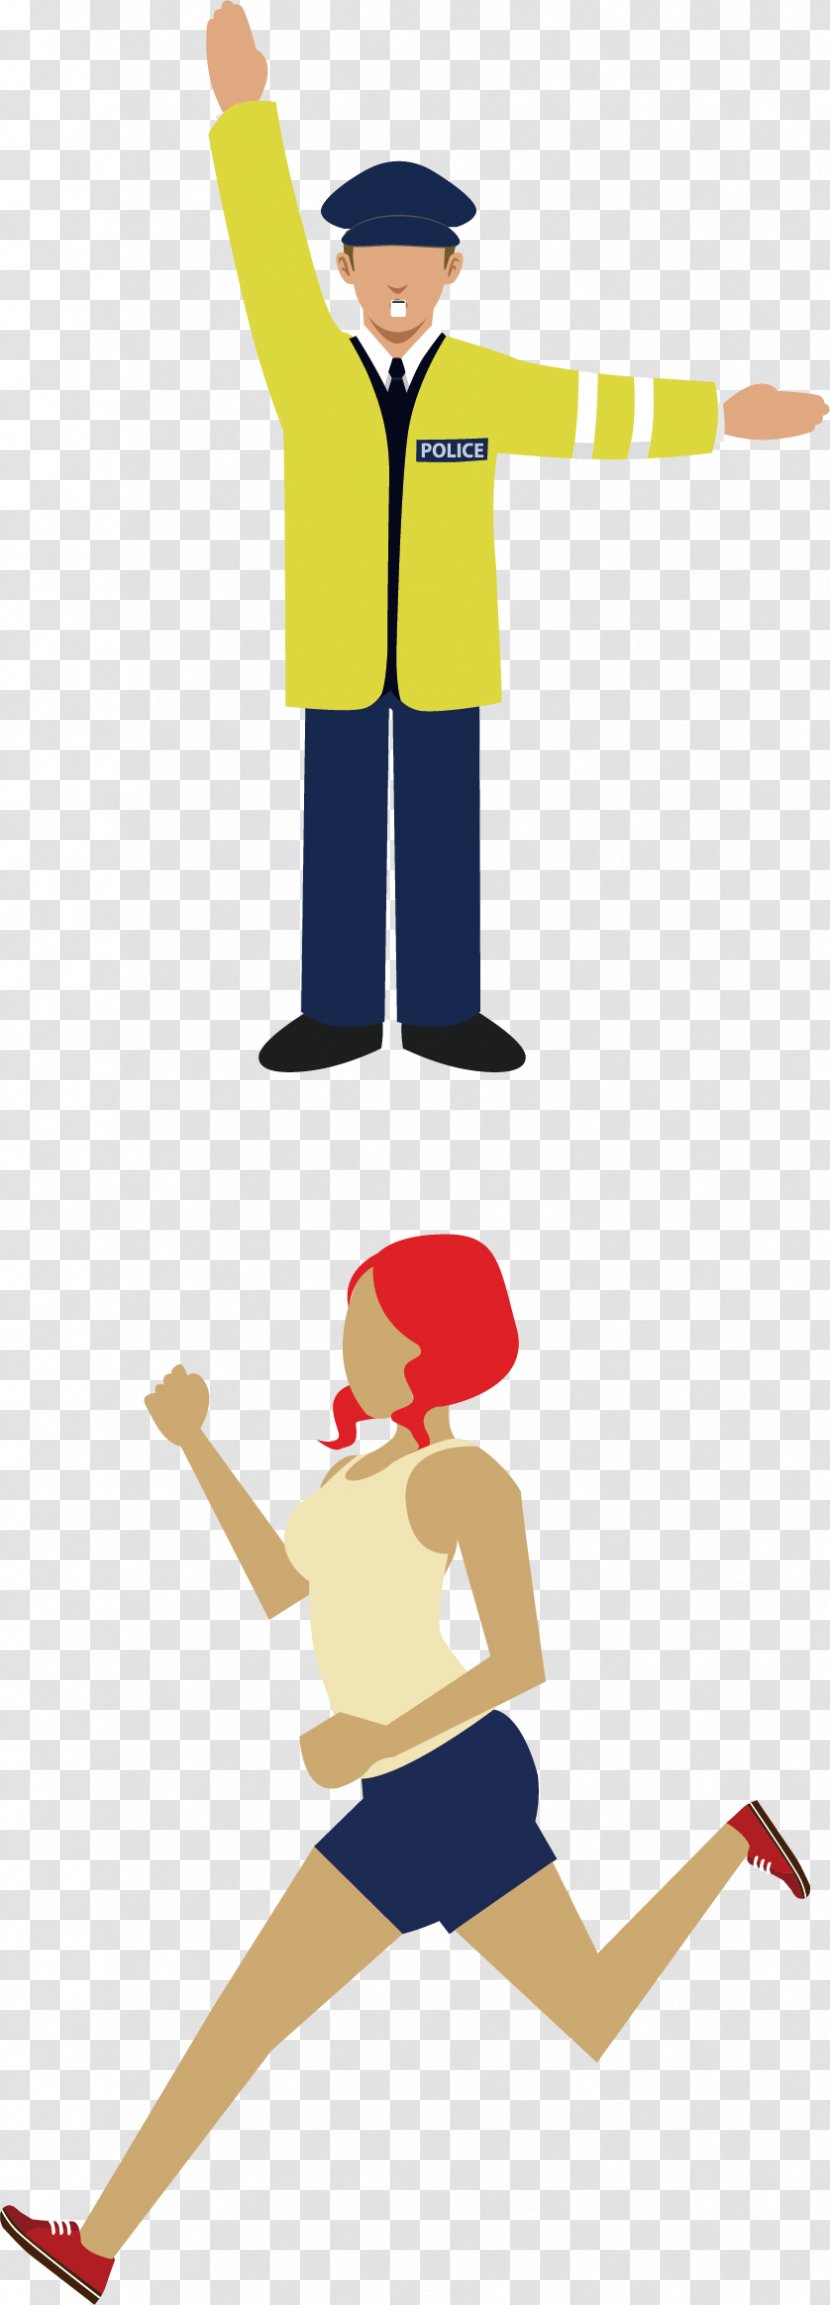 Walking Clip Art - Character Police Cartoon Poster Promotional Material Transparent PNG